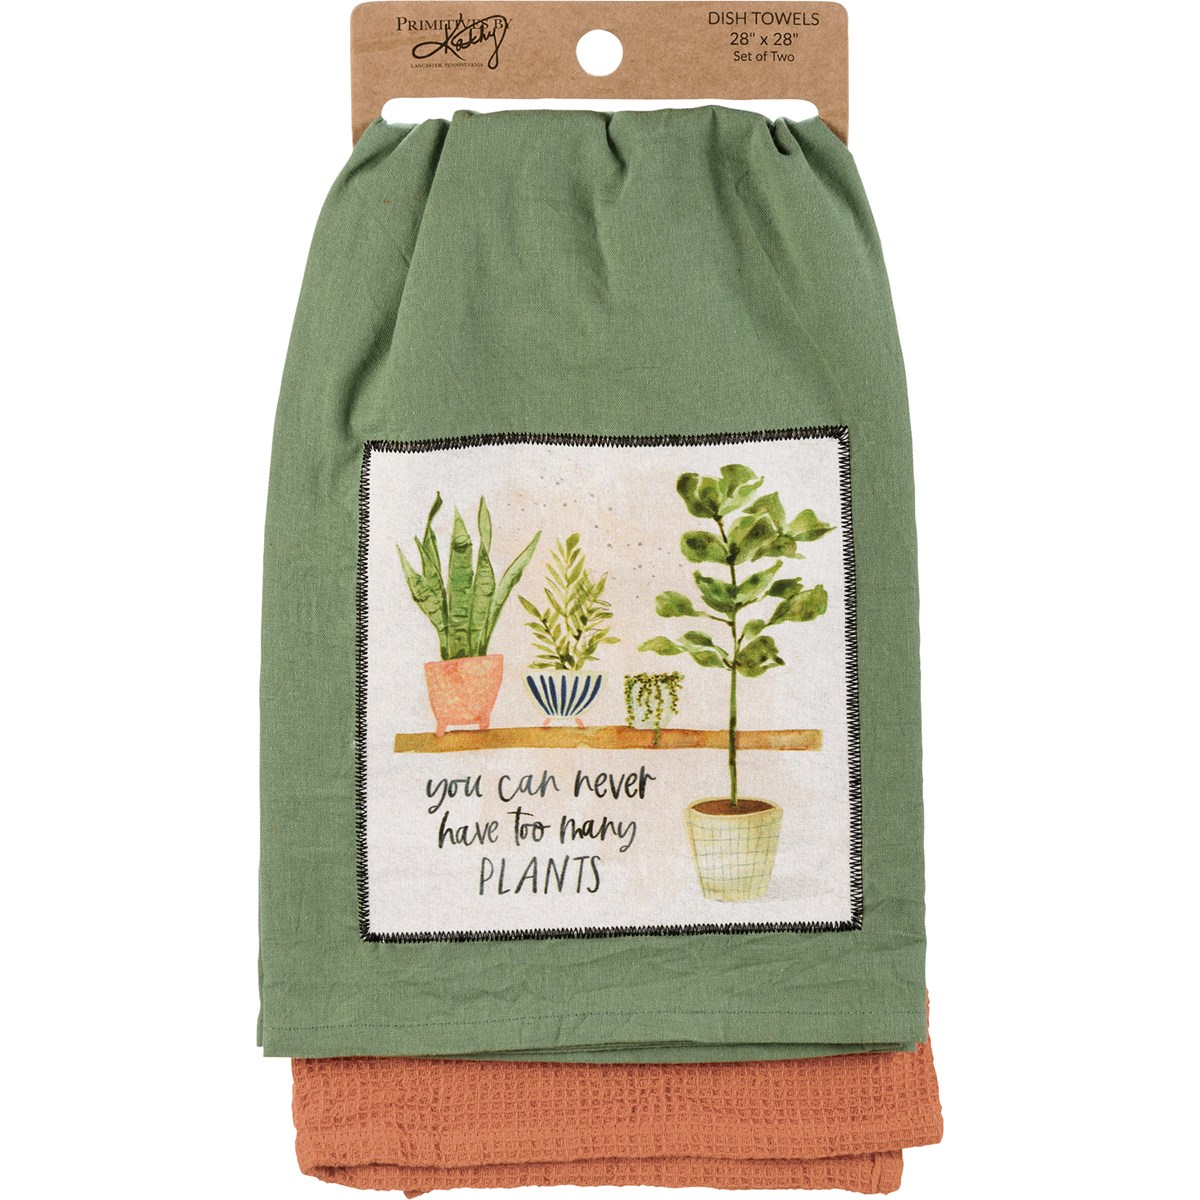 Can Never Have Too Many Plants Kitchen Towel Set - Cotton